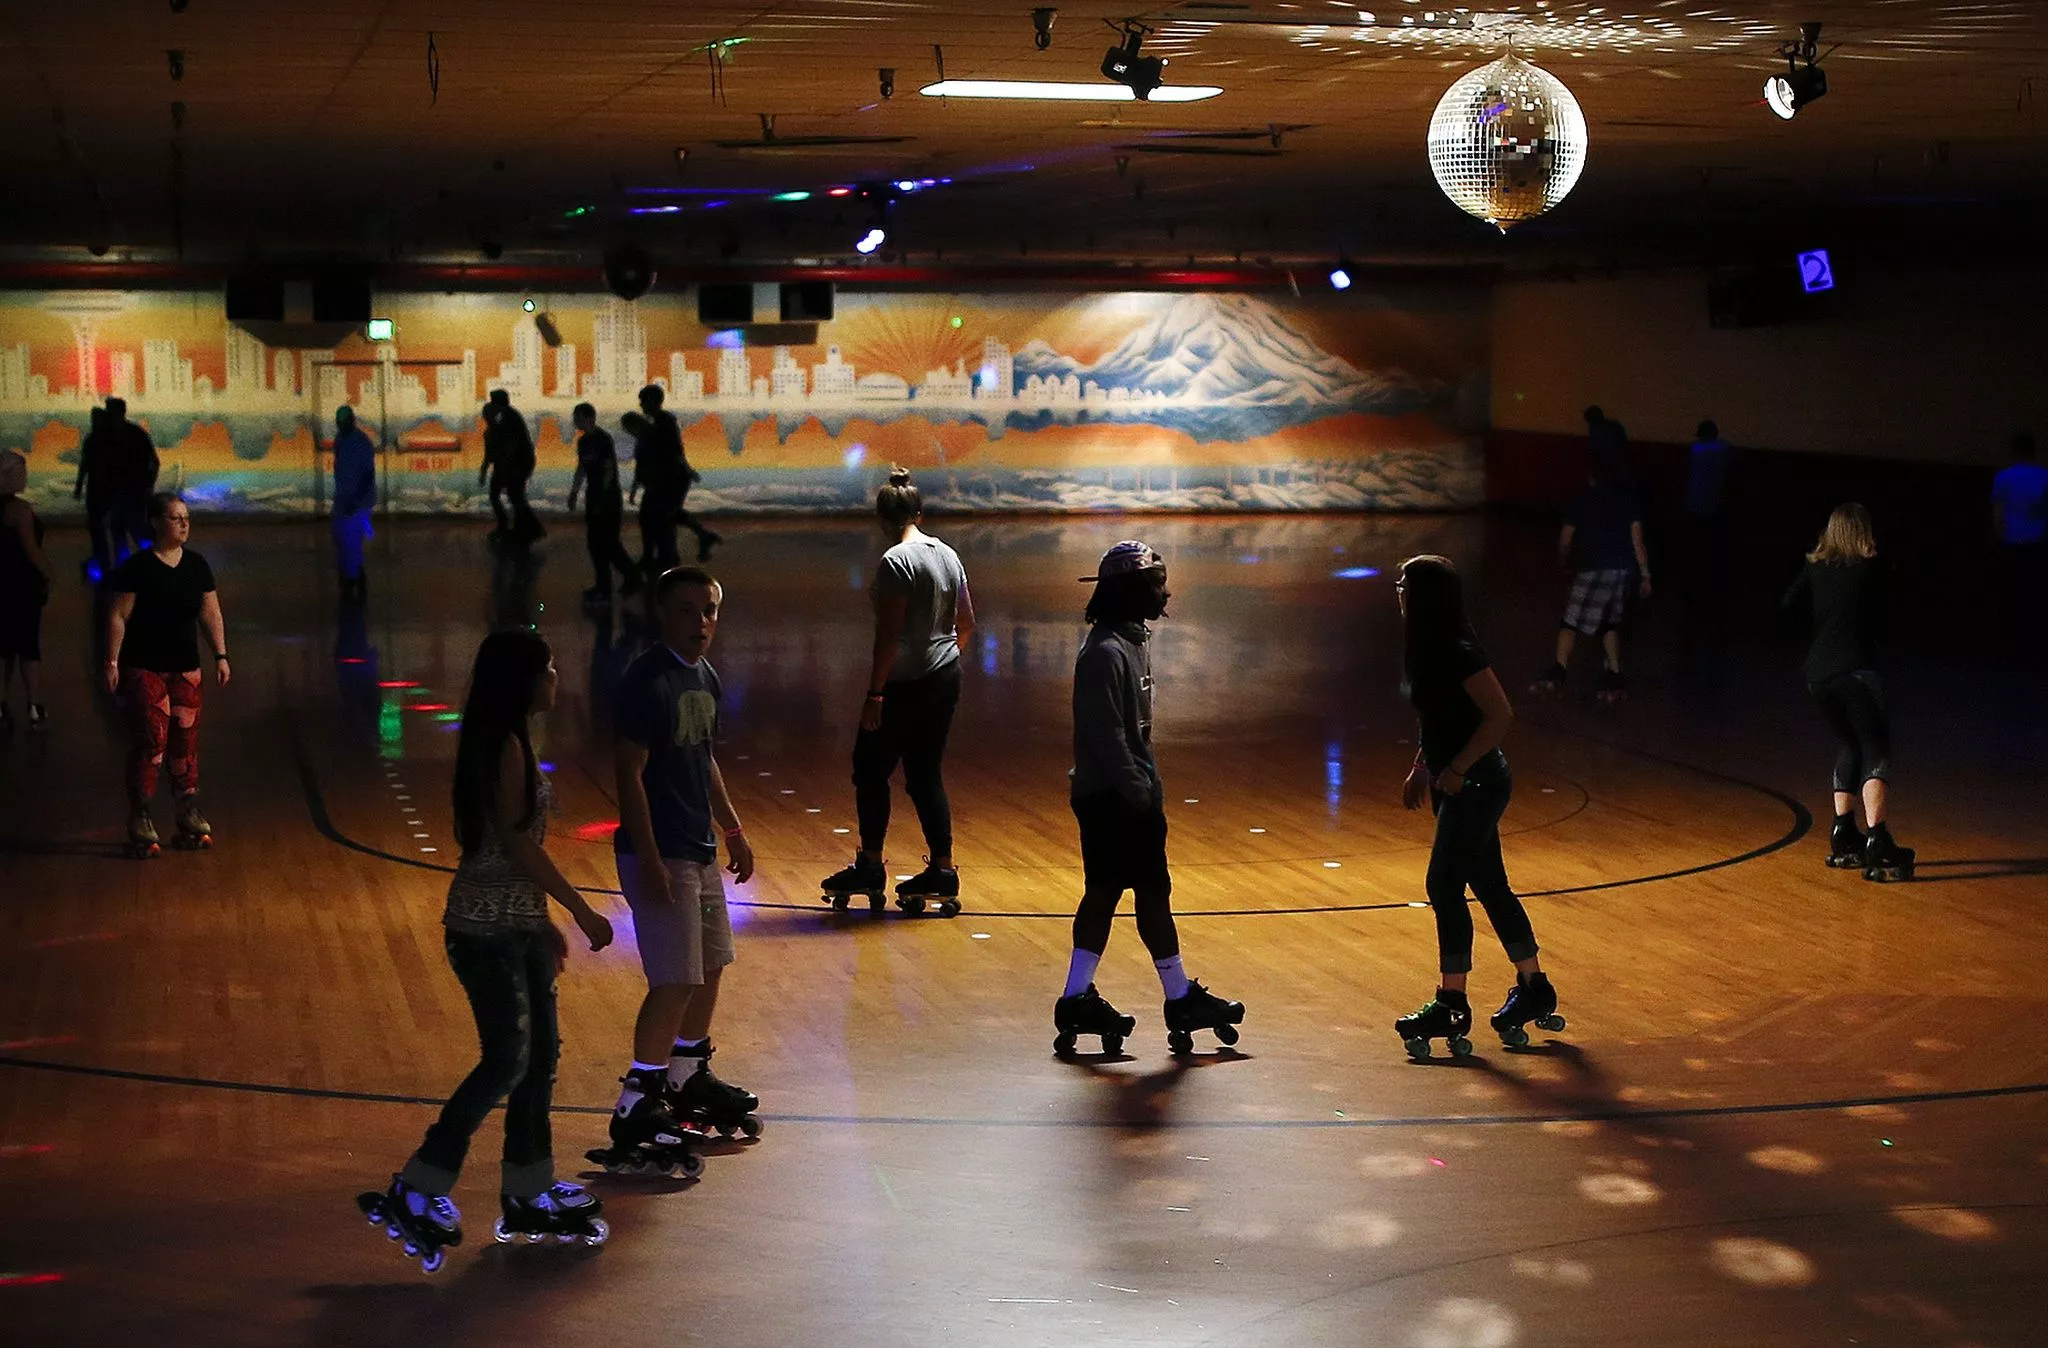 Chez Vous Roller Skating Rink in USA, North America | Roller Skating & Inline Skating - Rated 4.9